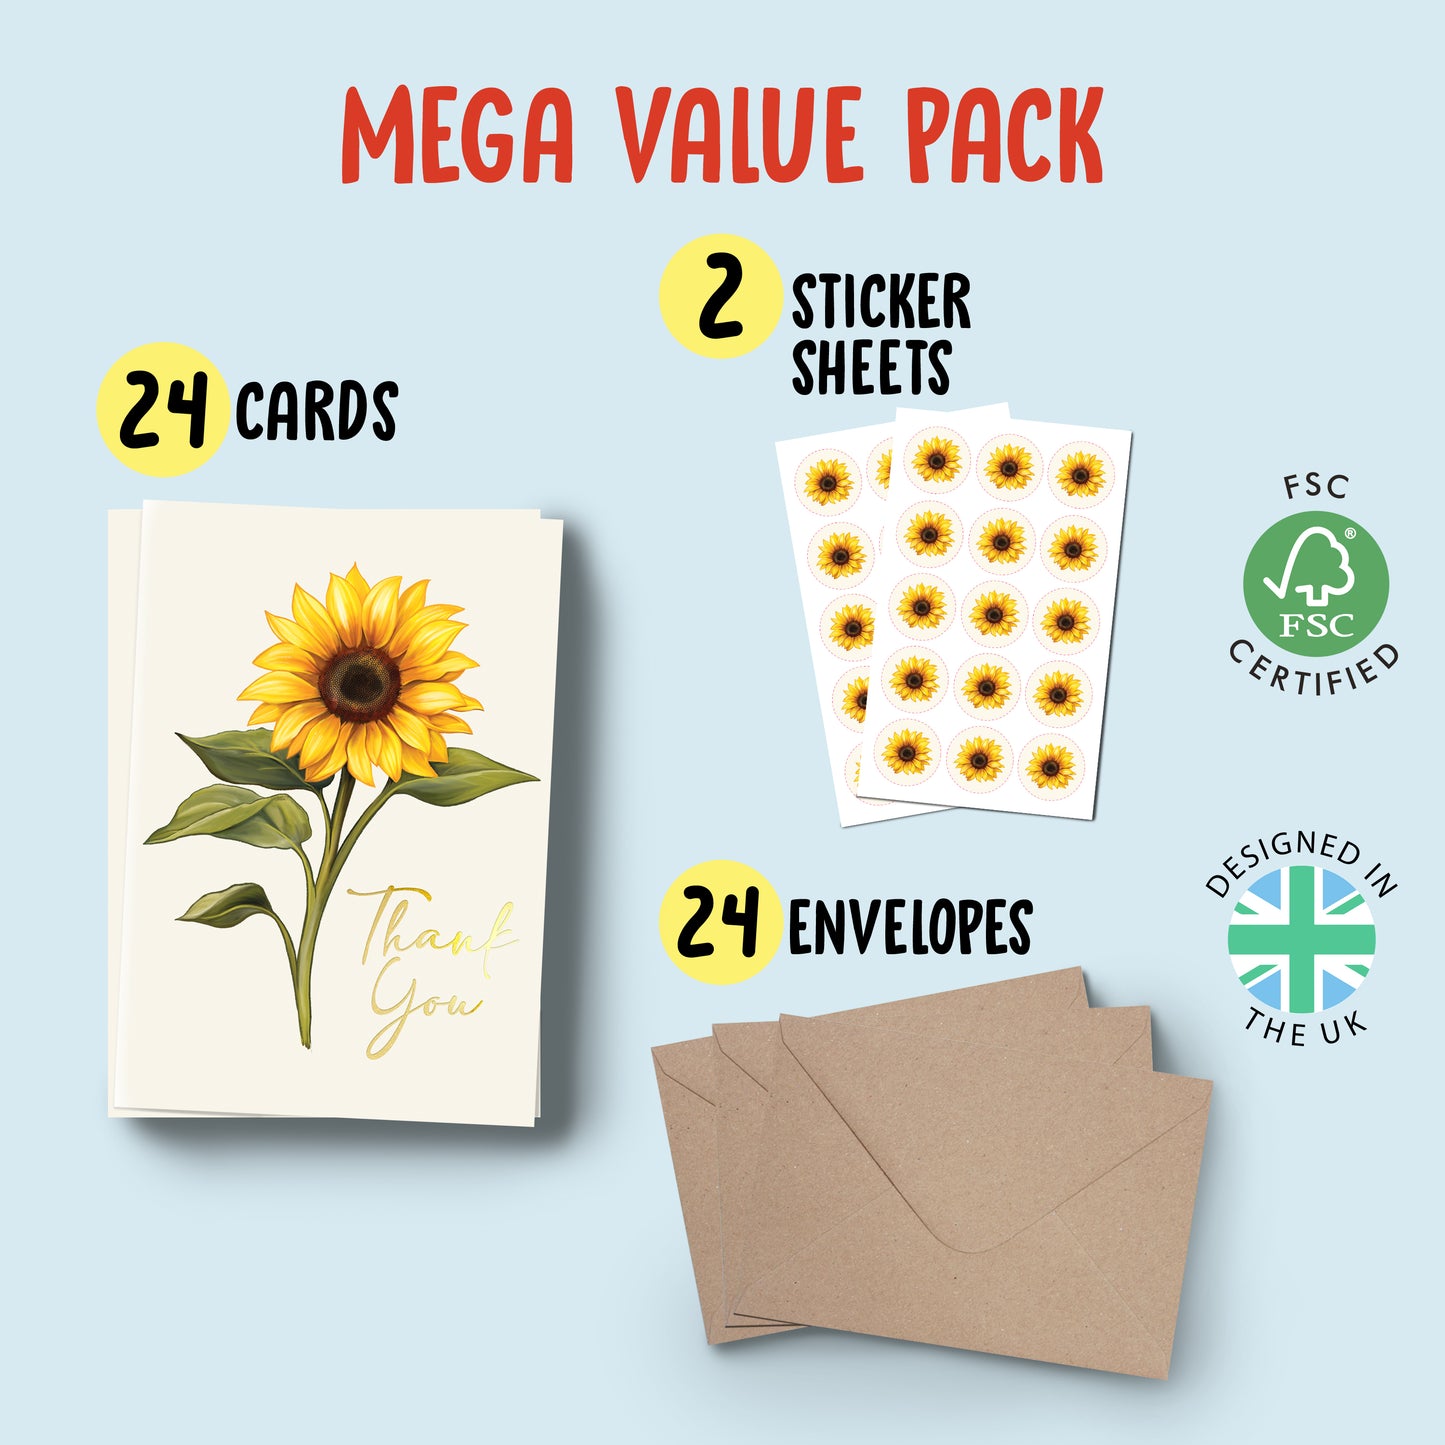 Foiled Thank You Cards Multipack - Sunflower Thank You Cards - Pack of 24 Cards